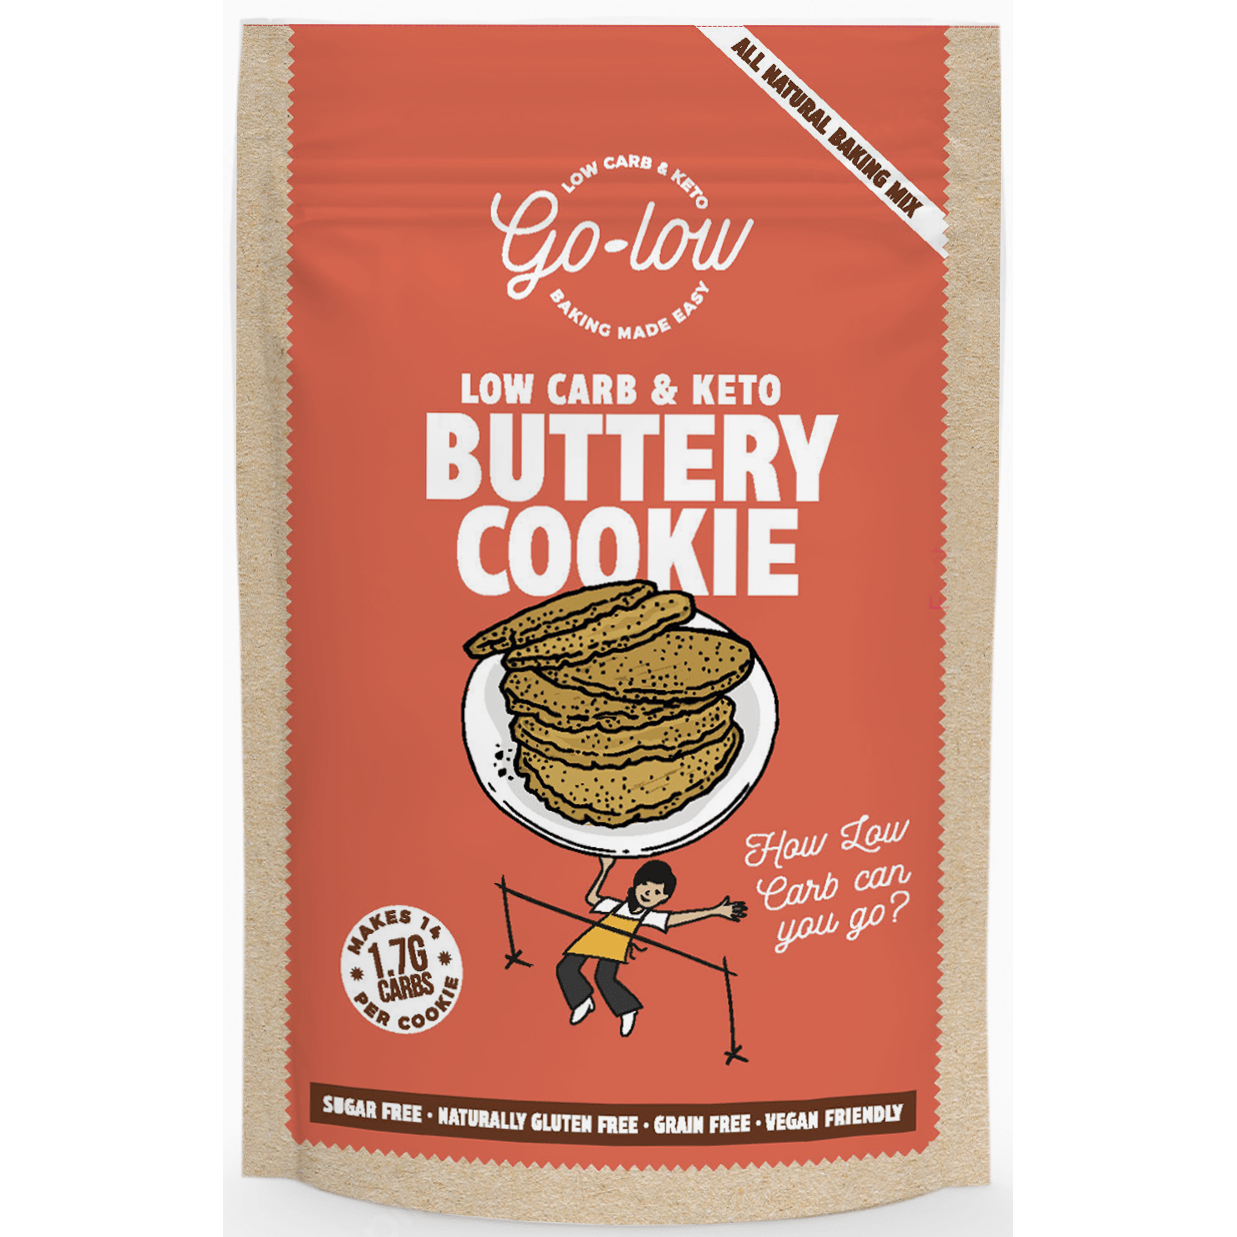 Go-low Keto Buttery Cookie Low Carb Baking Mix 179g